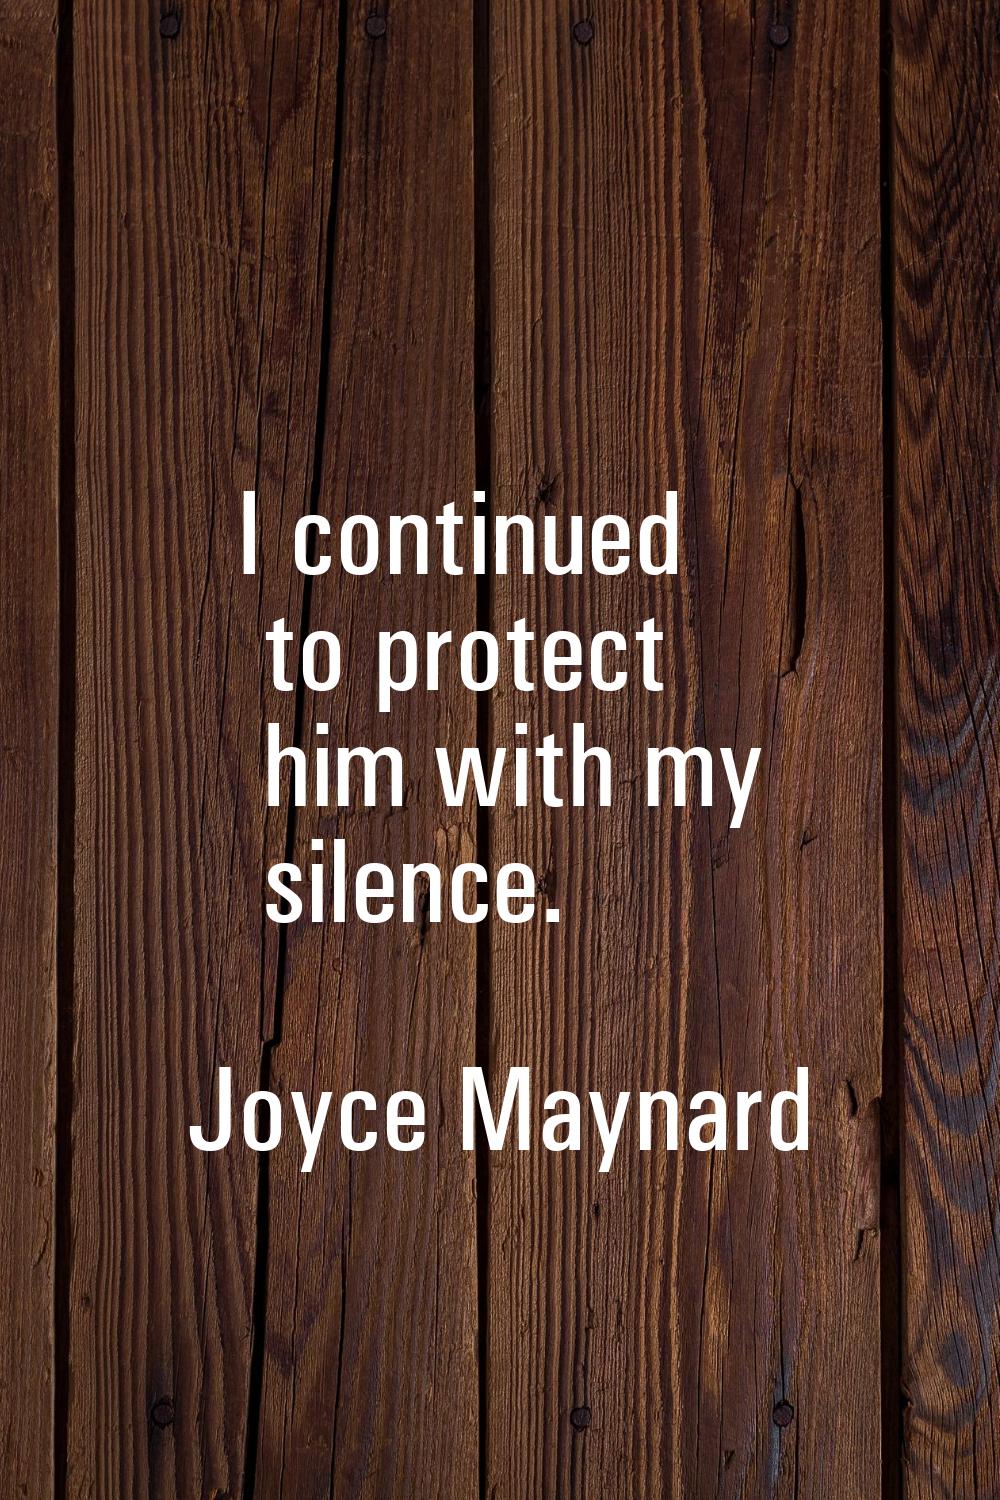 I continued to protect him with my silence.